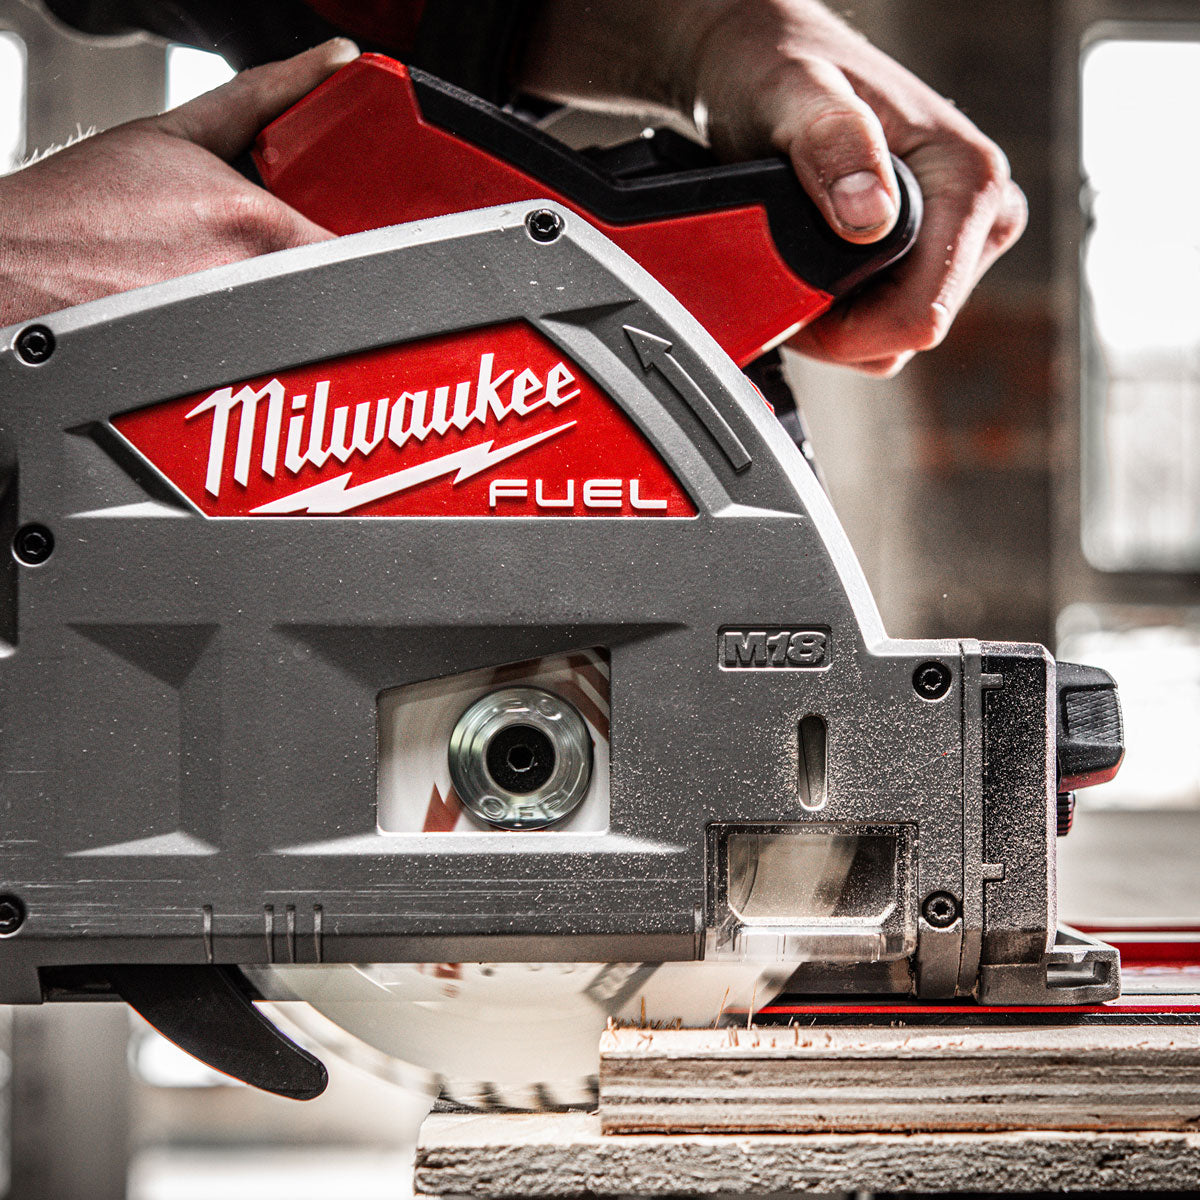 Milwaukee M18FPS55-0P 18V 165mm Fuel Brushless Plunge Saw with 2 x 5.0Ah Battery & Guide Rail Kit